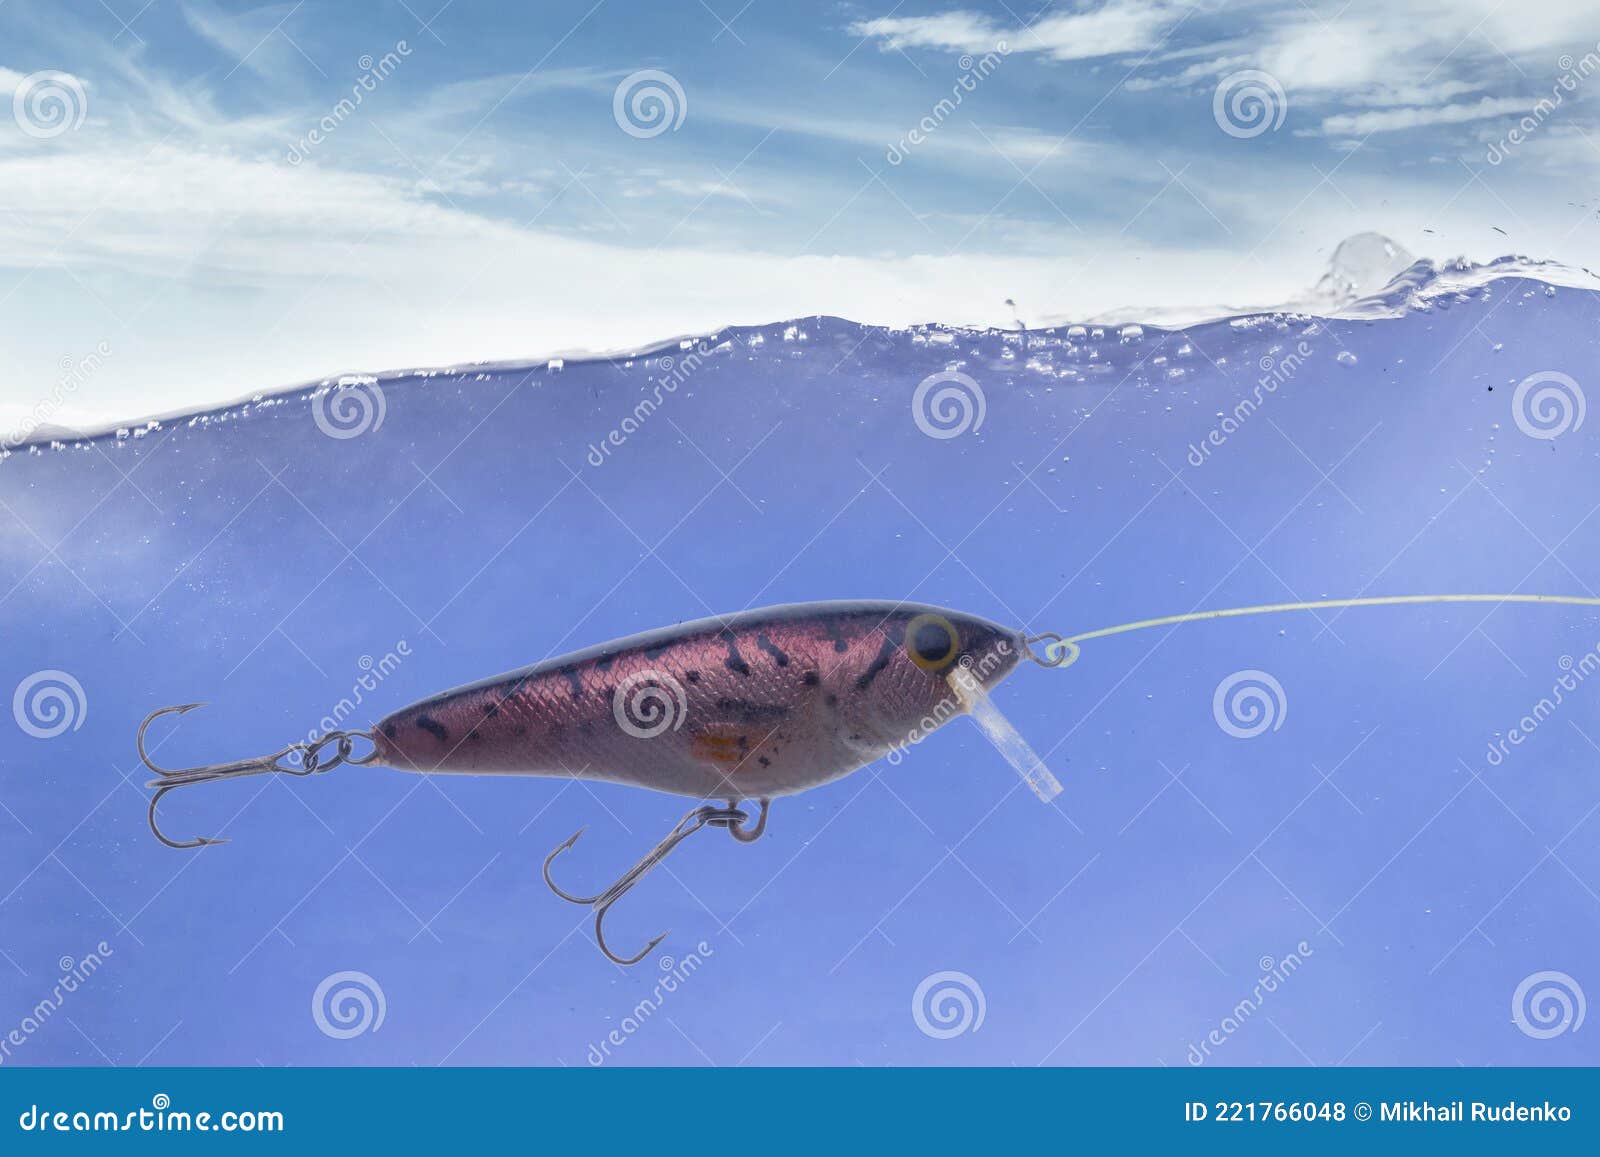 A the Fishing Tackle Lure Underwater in the Sea, Hunting and